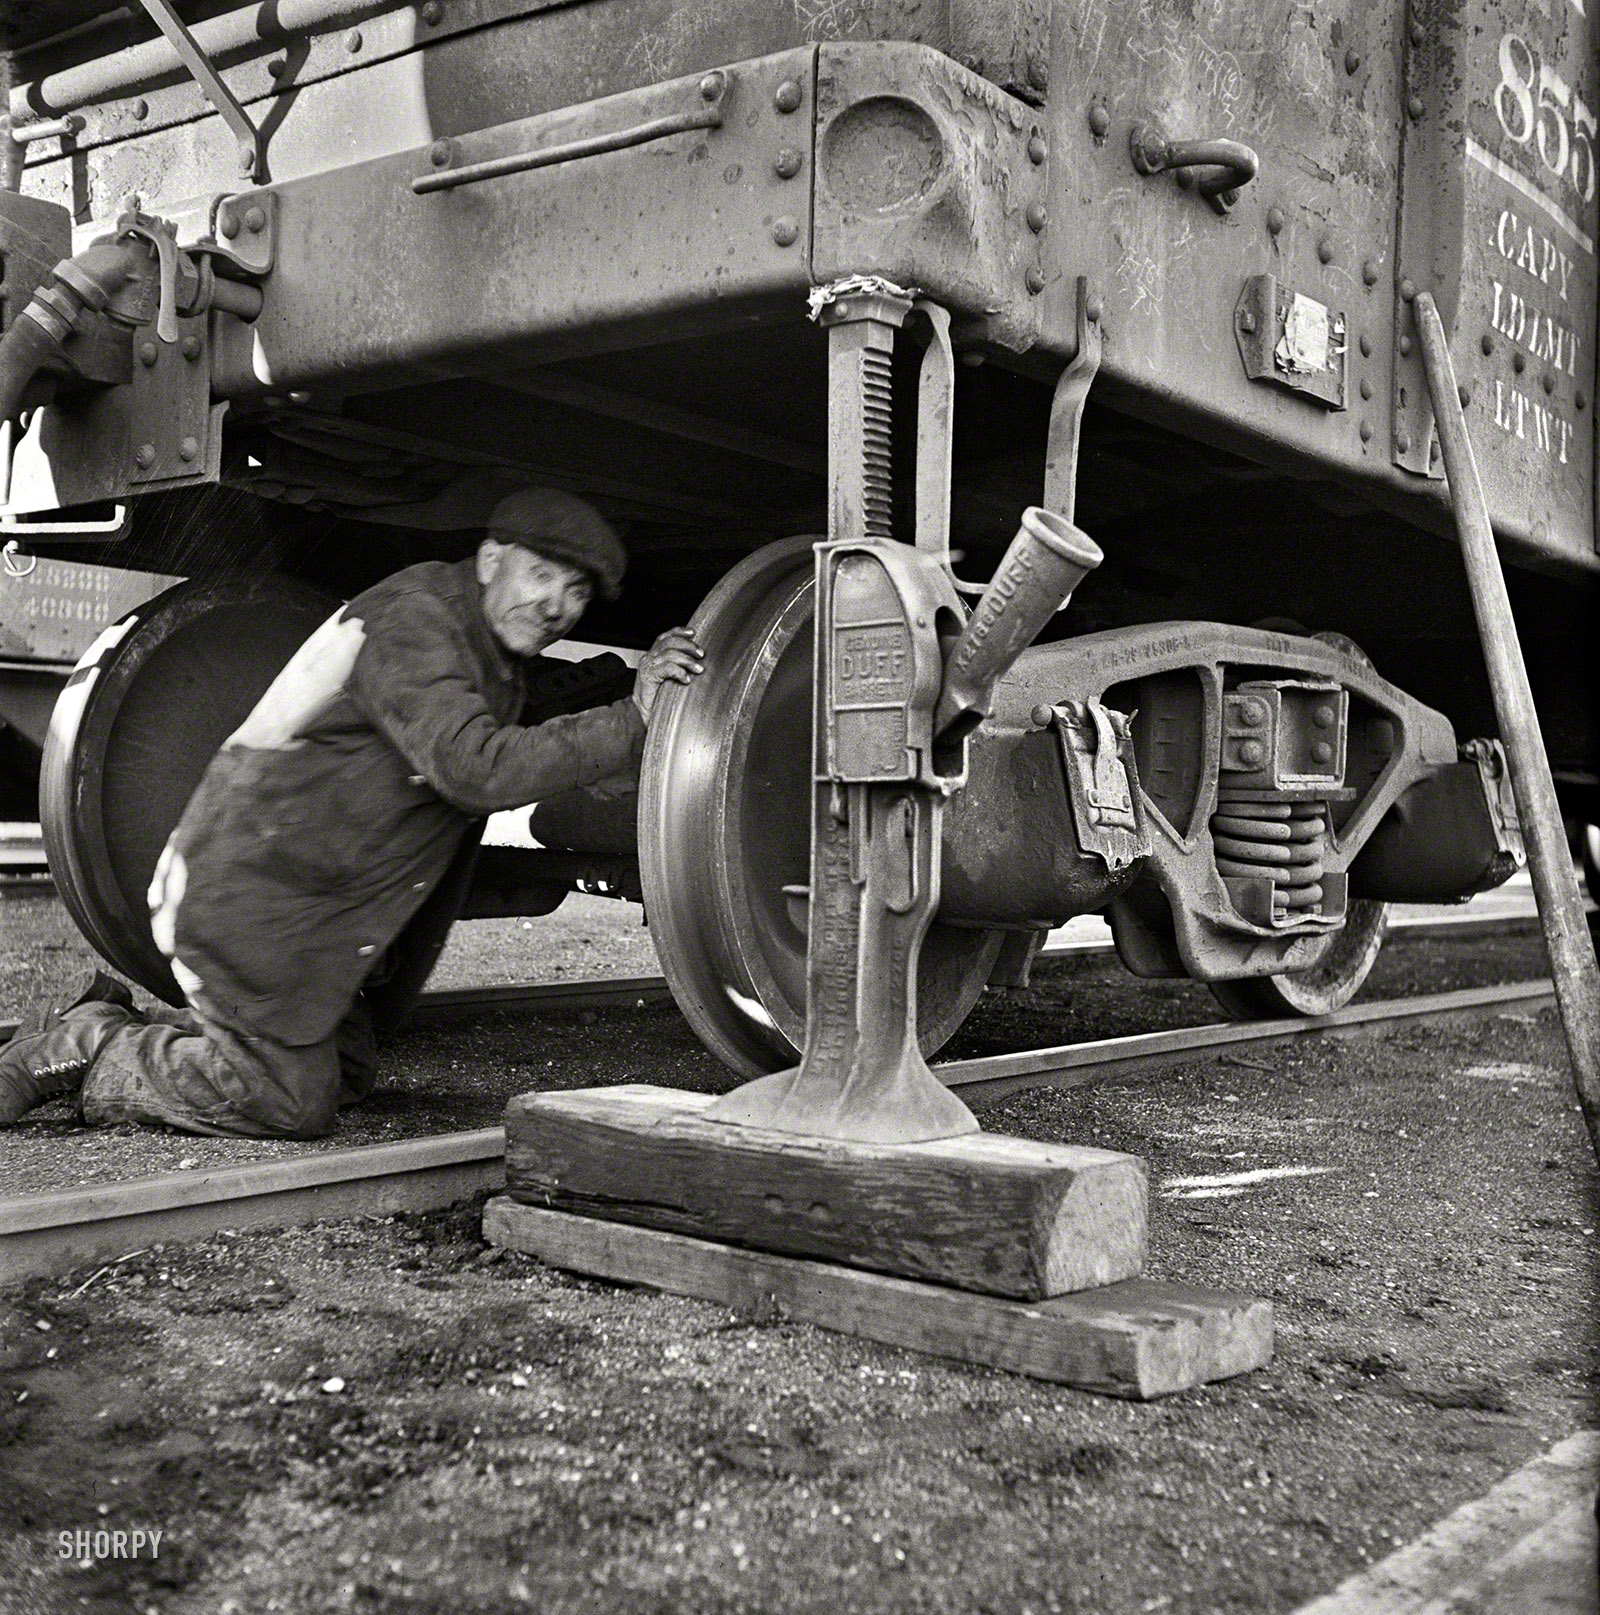 November 1942. "Chicago, Illinois. Jacking up a car on the repair tracks at an Illinois Central Railroad yard." Someone get the spare out of the trunk? Medium-format negative by Jack Delano, Office of War Information. View full size.